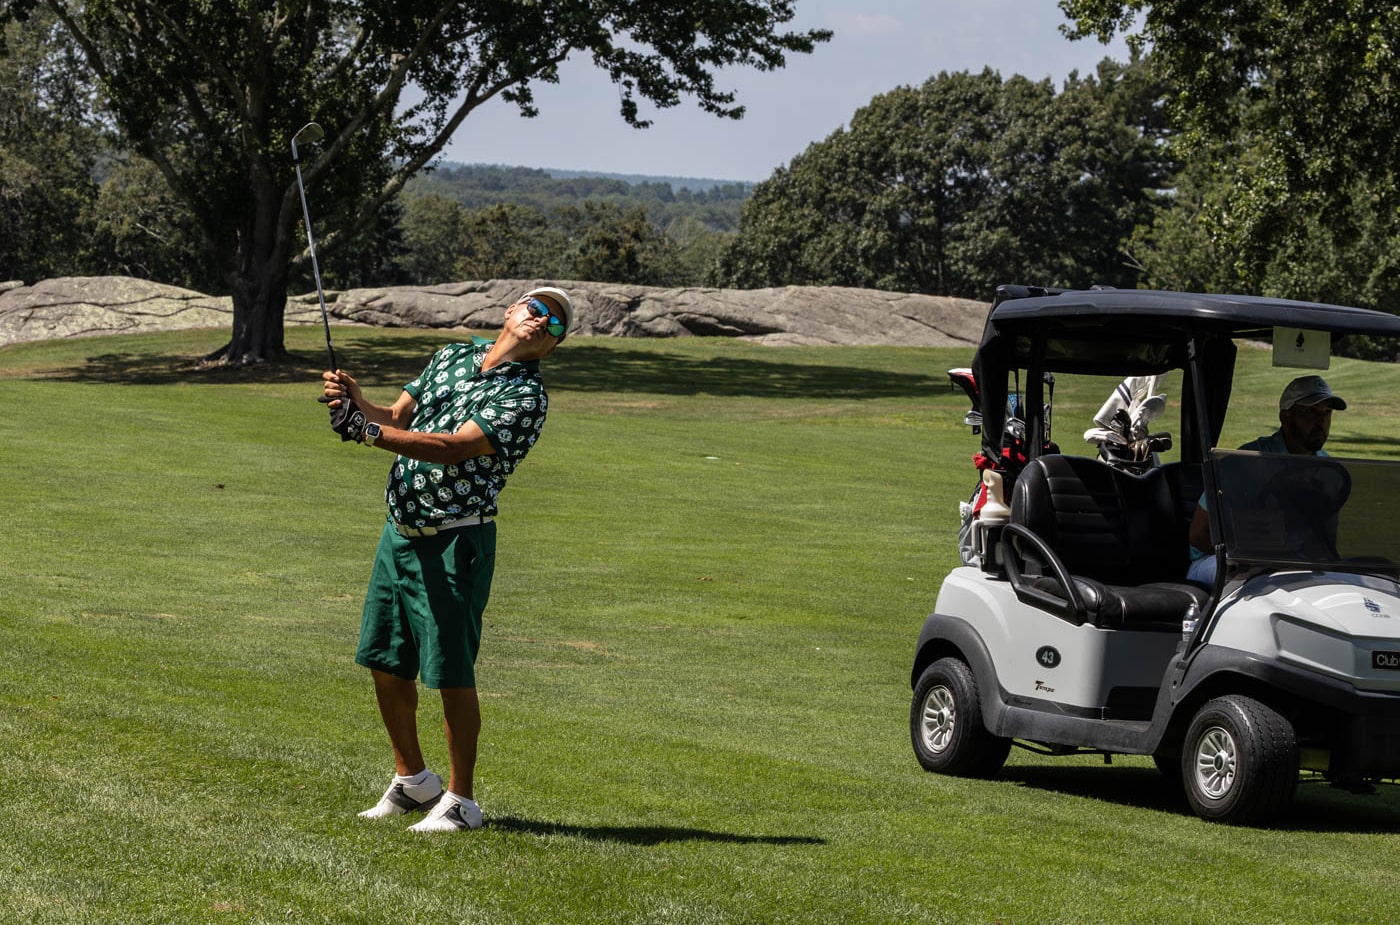 Country-Club-Of-New-Bedford FB-2023-Mens-FB-Gallery August-2023-Country-Club-Of-New-Bedford-FB-2023-Mens-FB-Gallery August-2023-Mens-FB-Gallery-Friday-Photos-Image-10